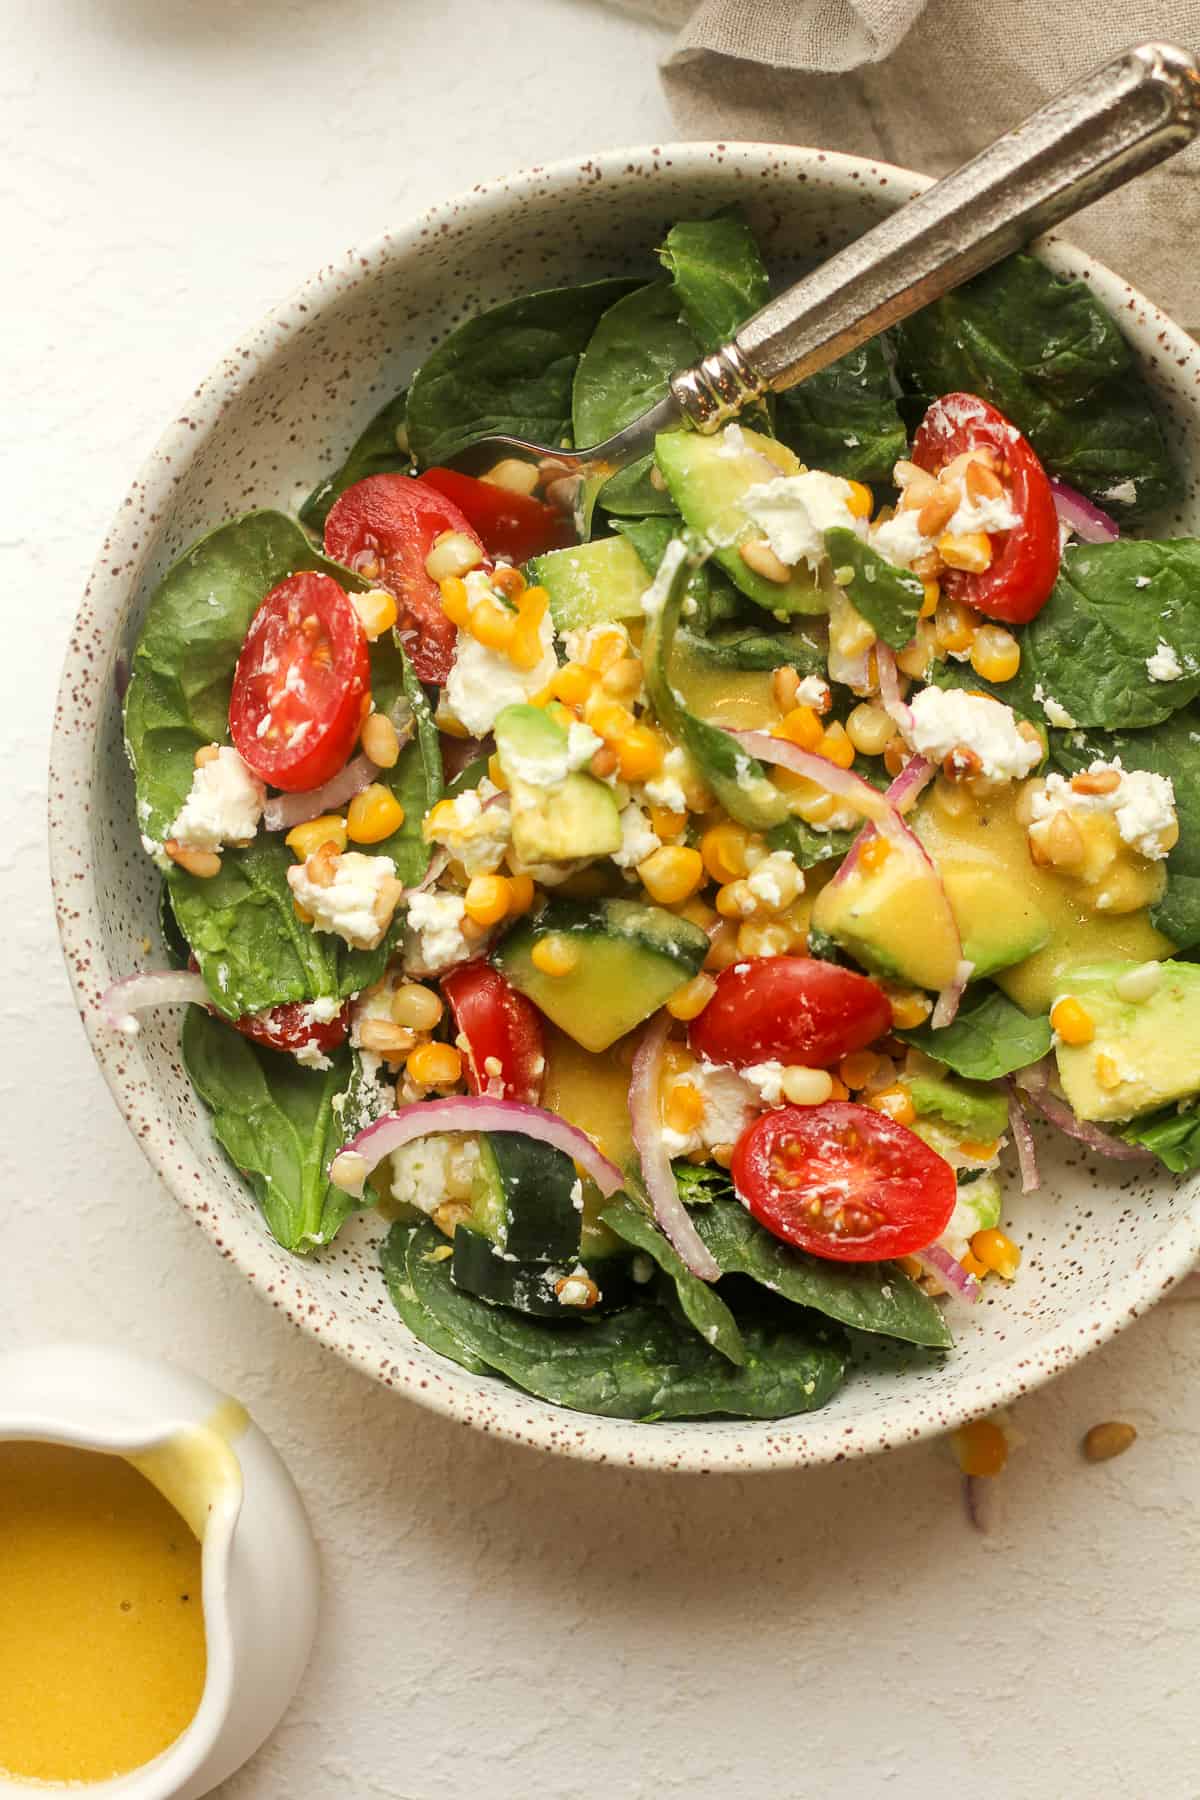 A serving of goat cheese spinach salad.